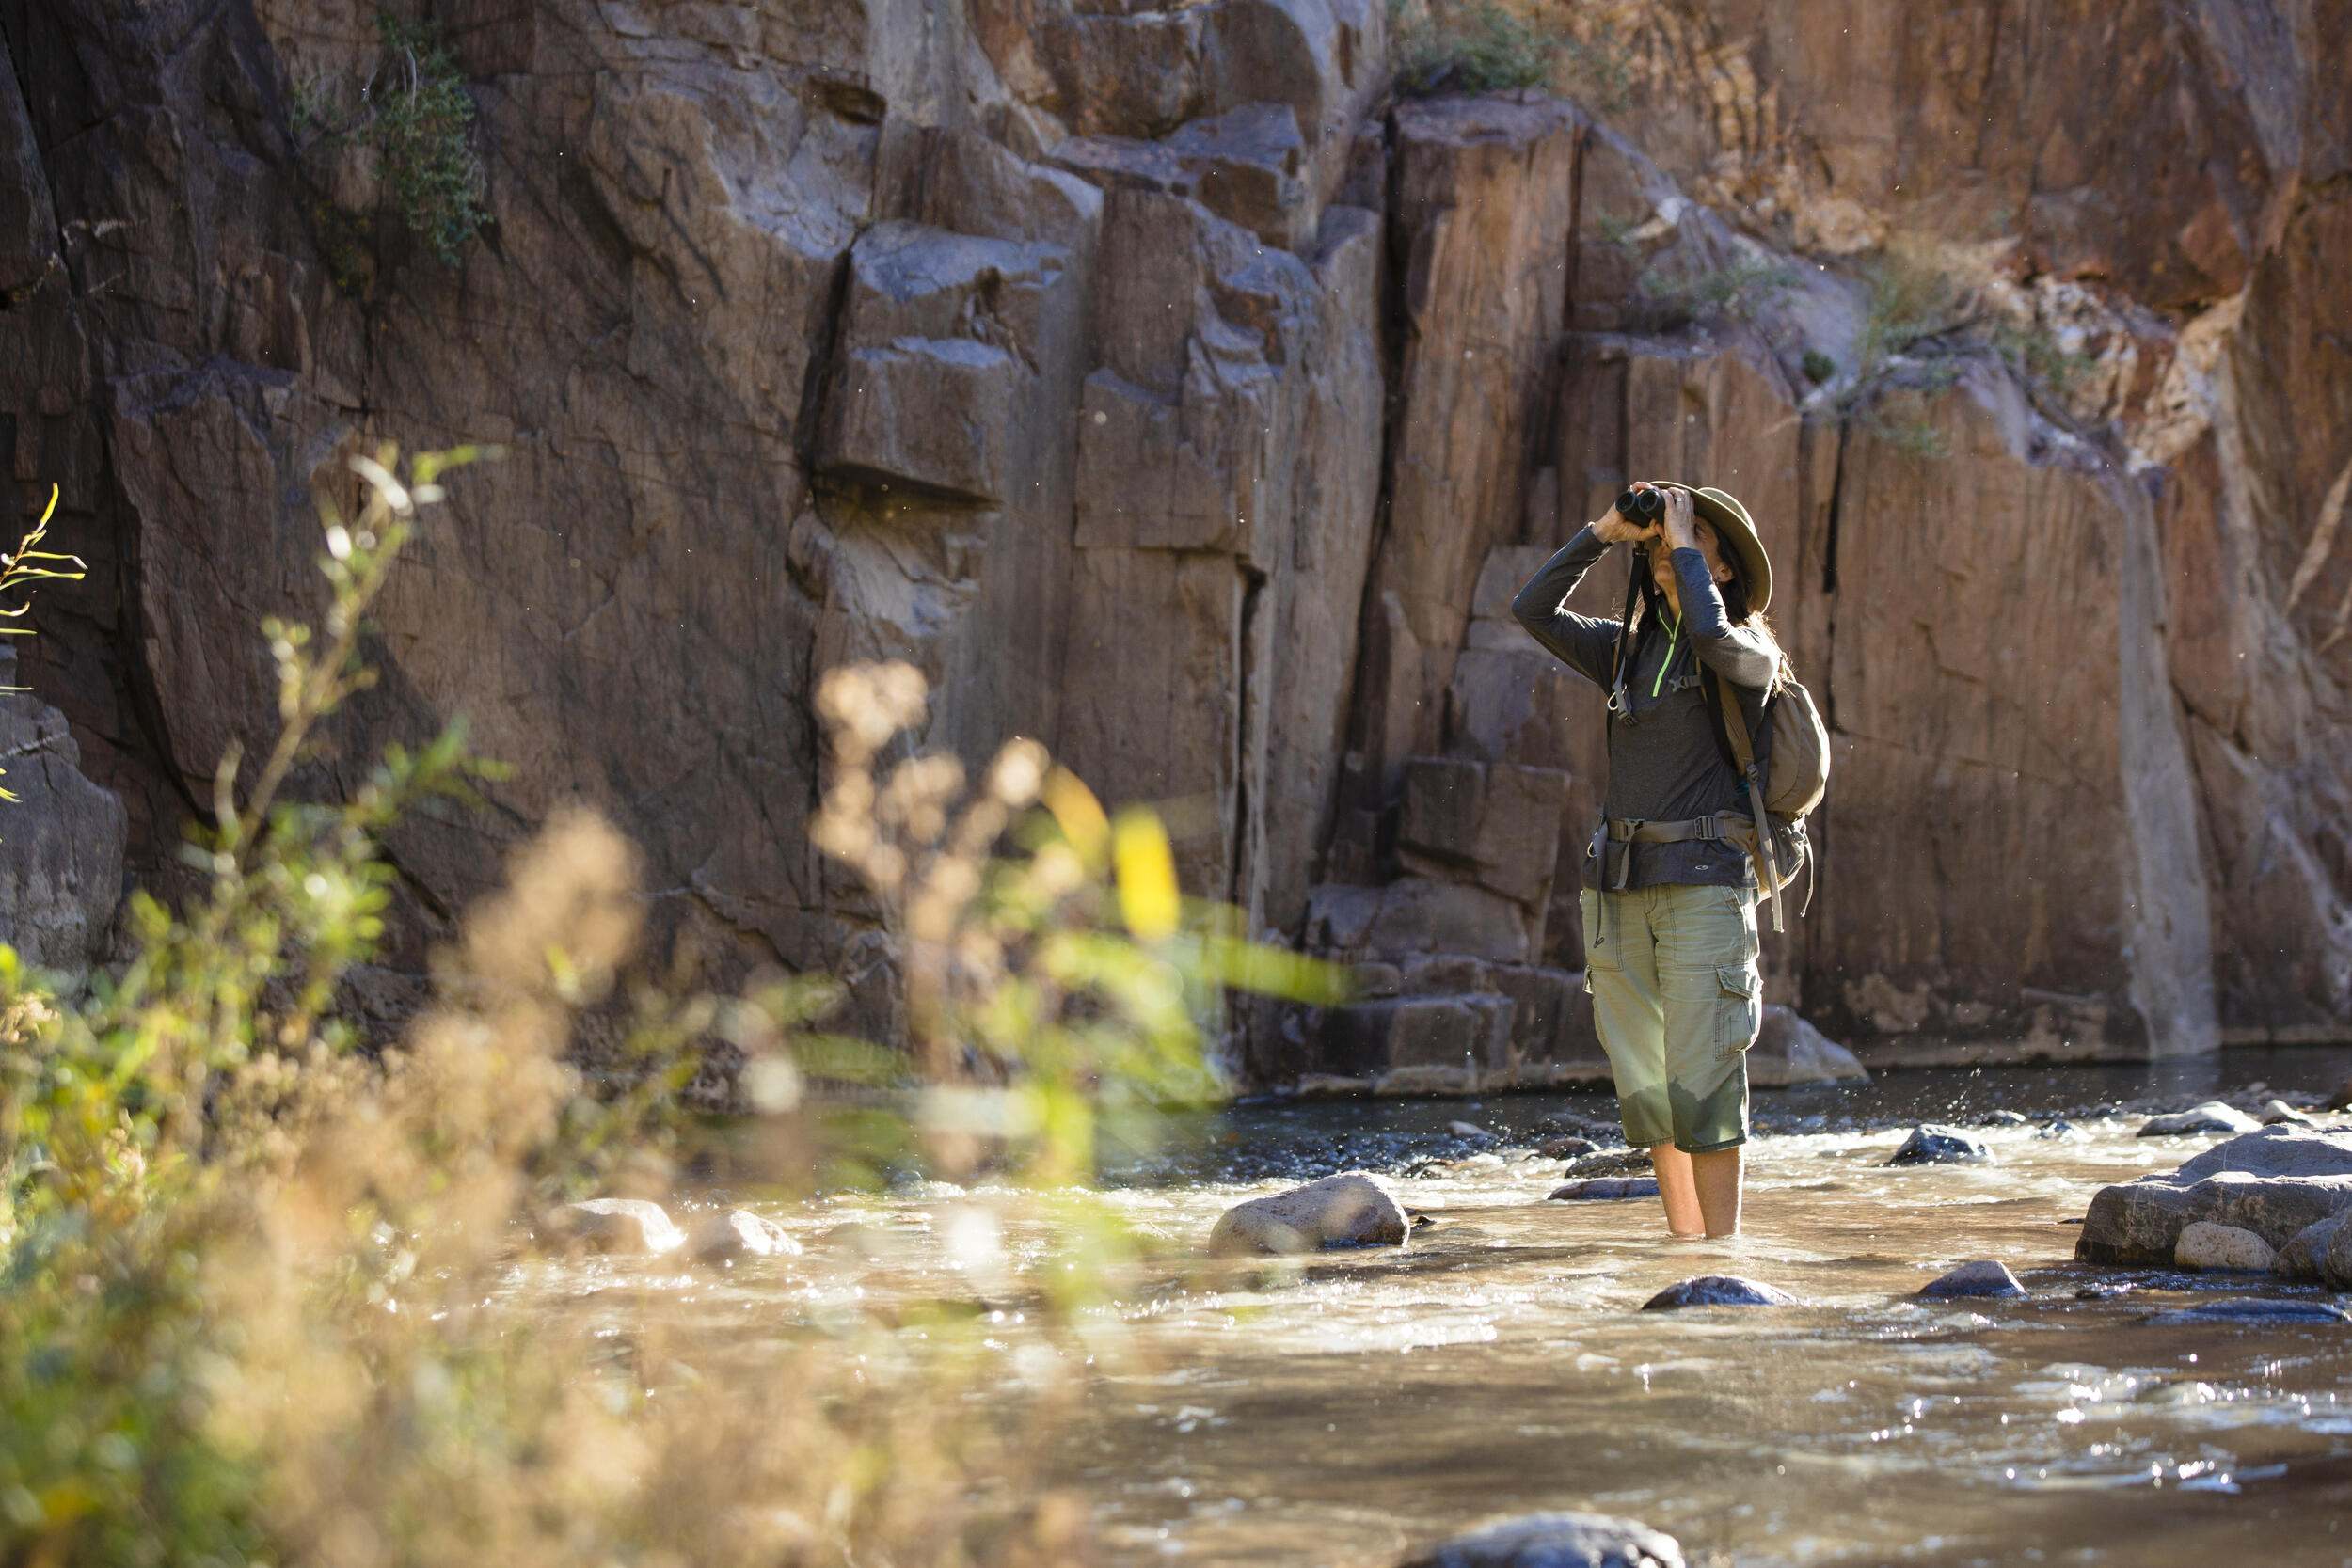 A hiker looks through binoculars while standing in moving water in a canyon.